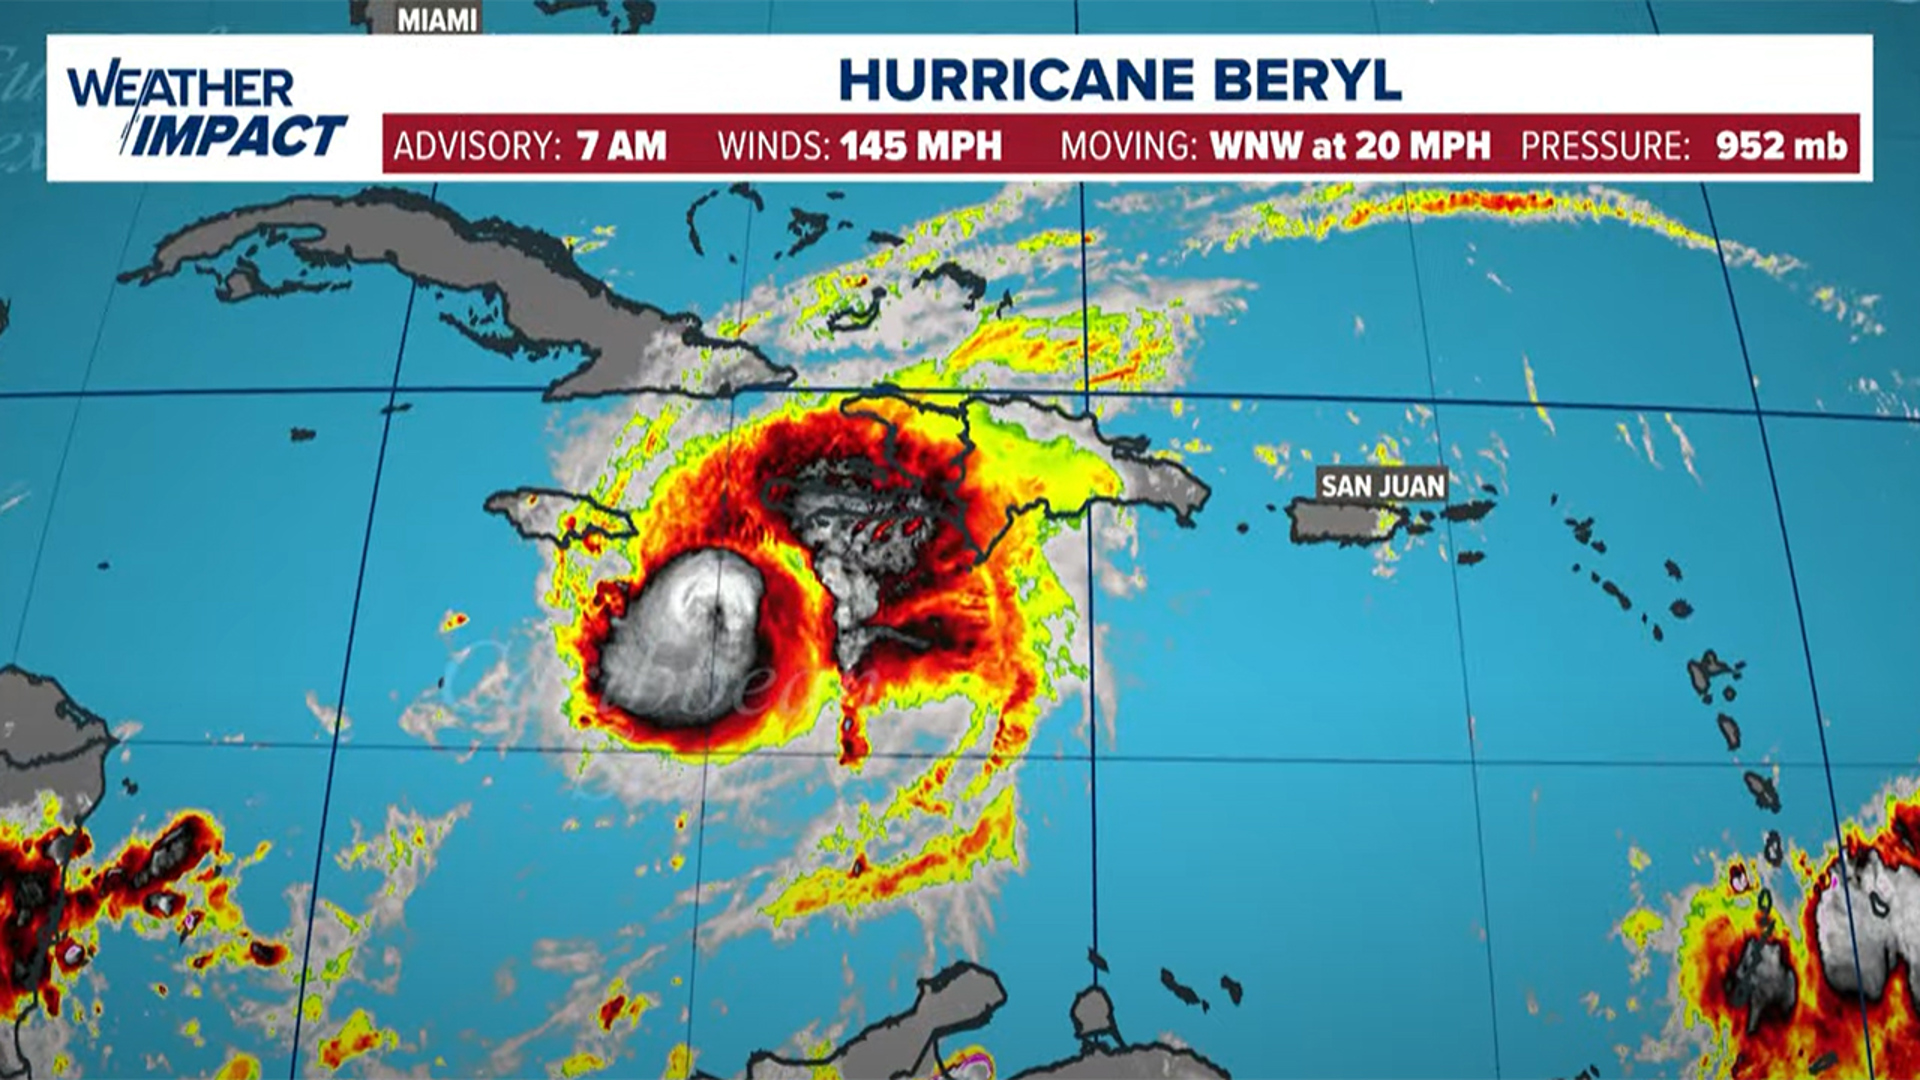 Hurricane Beryl roared through open waters Wednesday as a powerful Category 4 storm headed toward Jamaica after earlier making landfall in the southeast Caribbean.